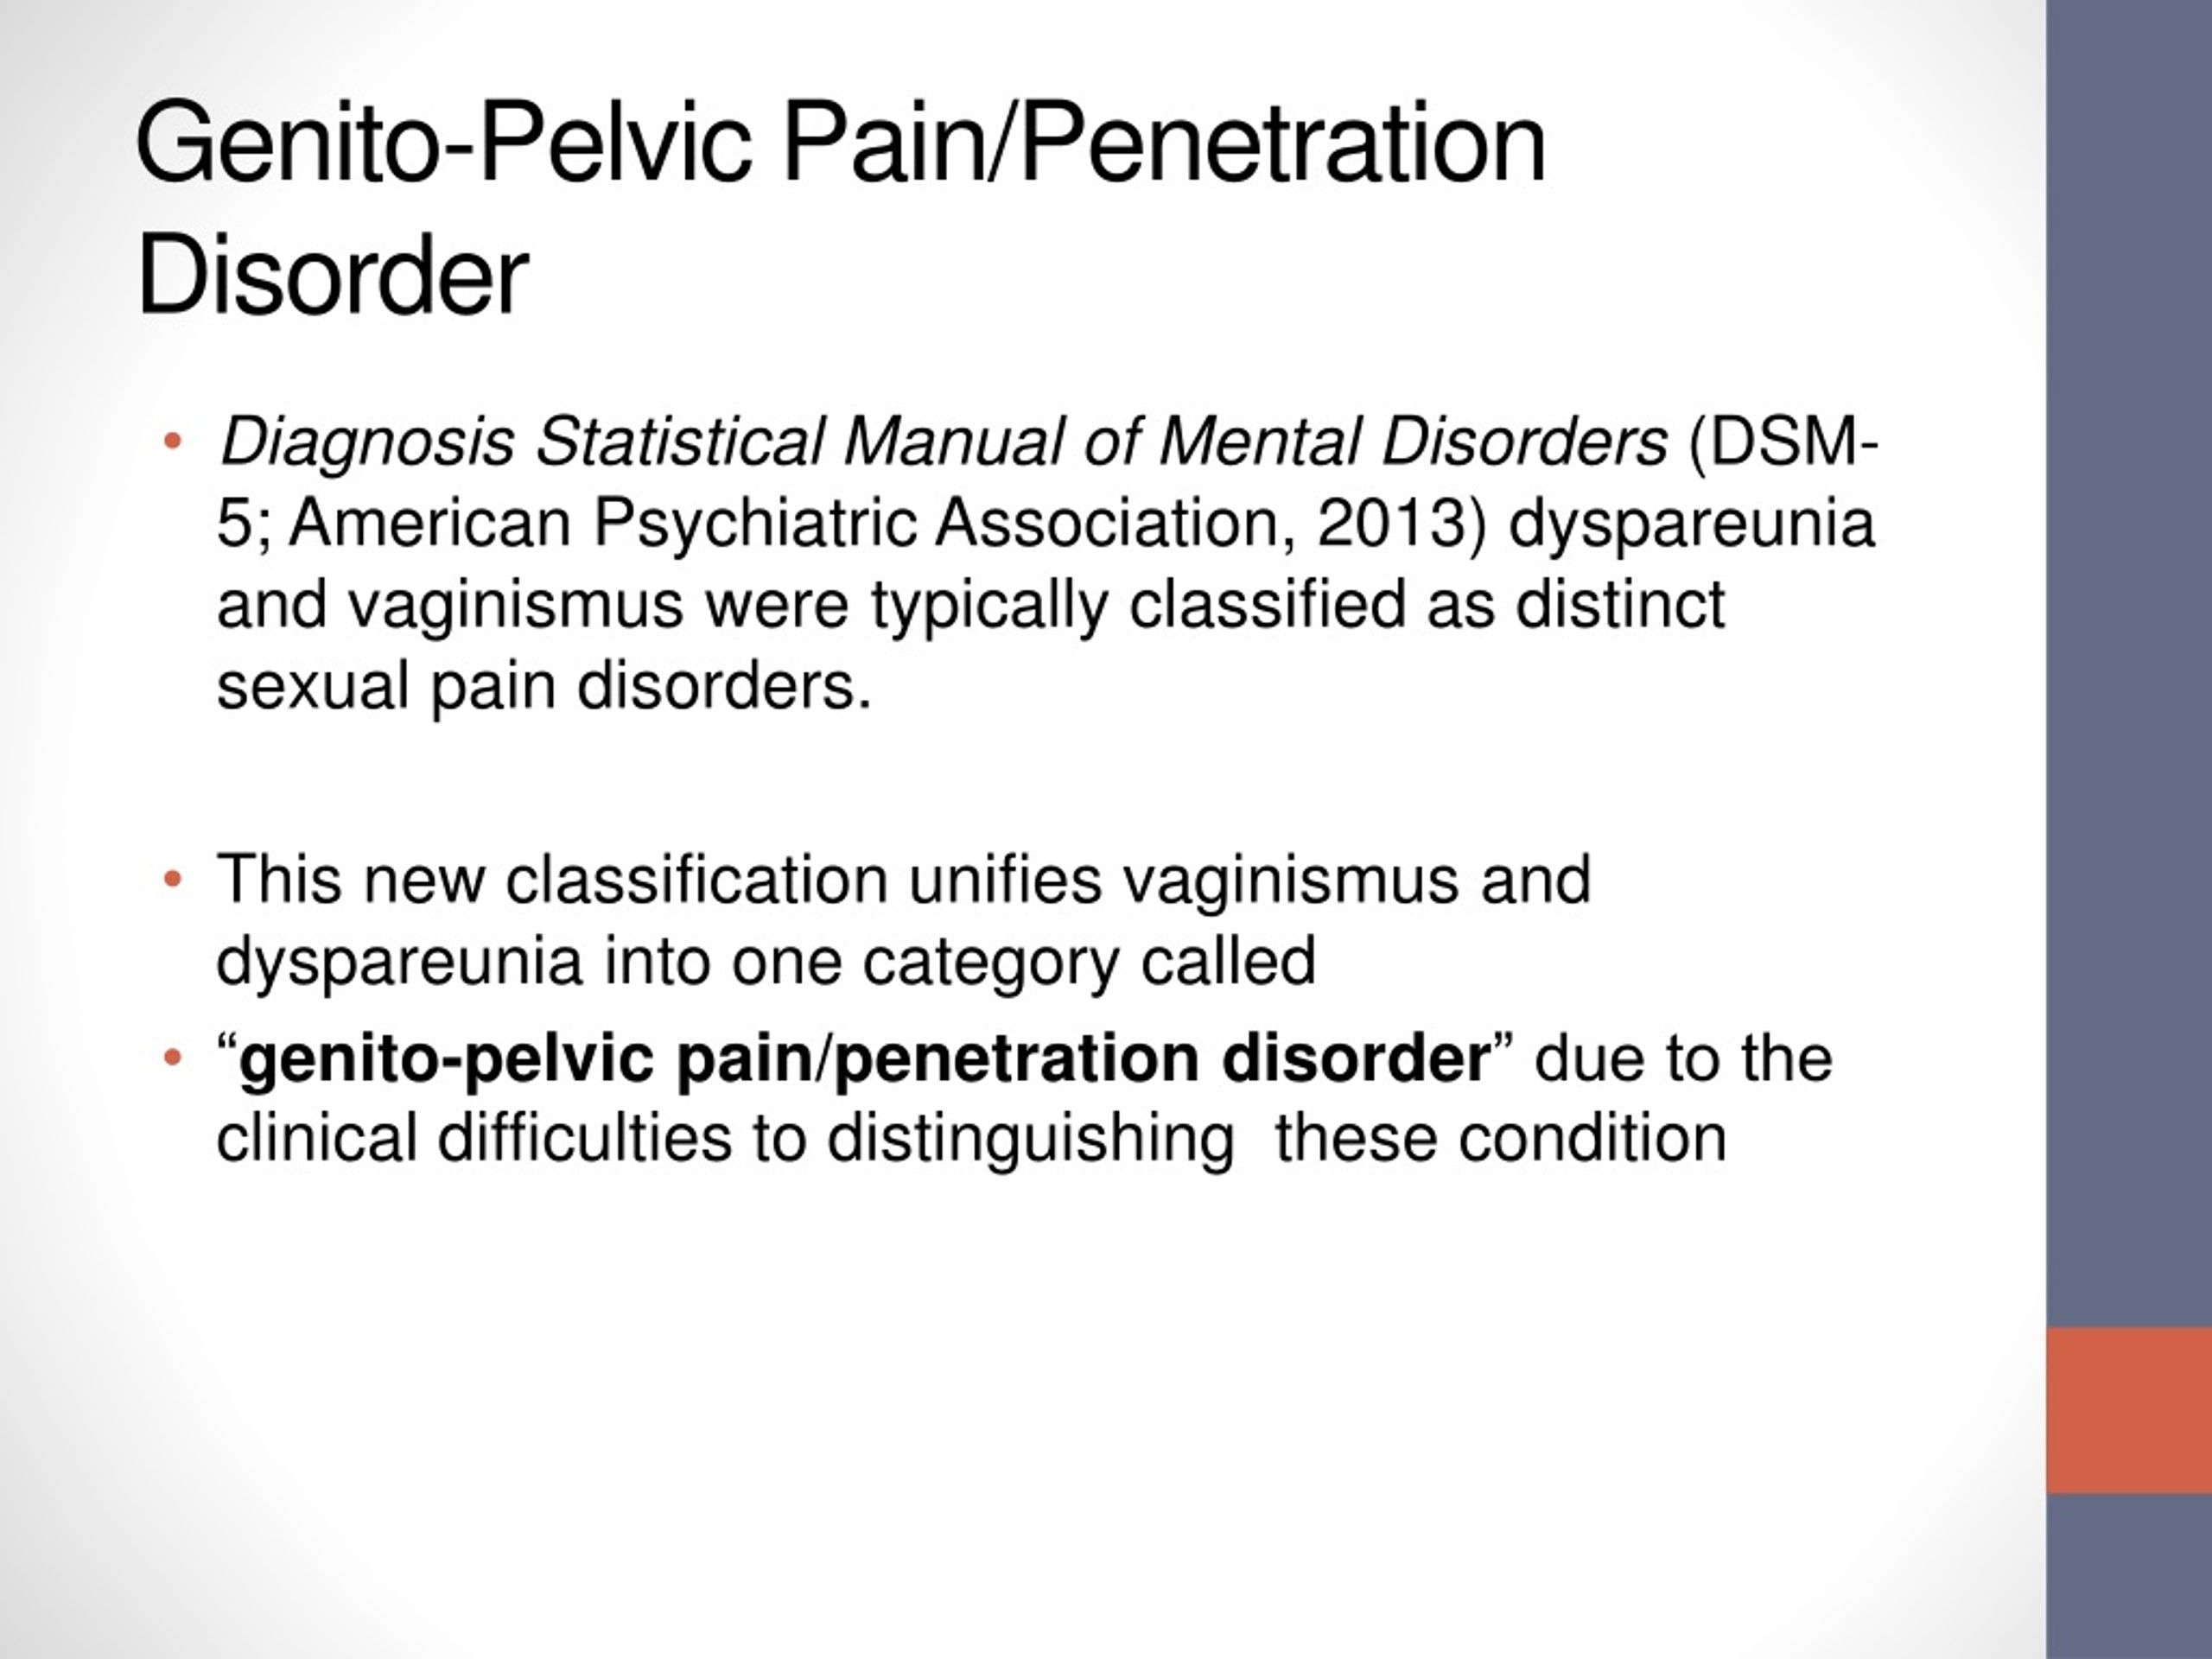 Ppt Genitopelvic Pain Penetration Disorder Powerpoint Presentation Free Download Id